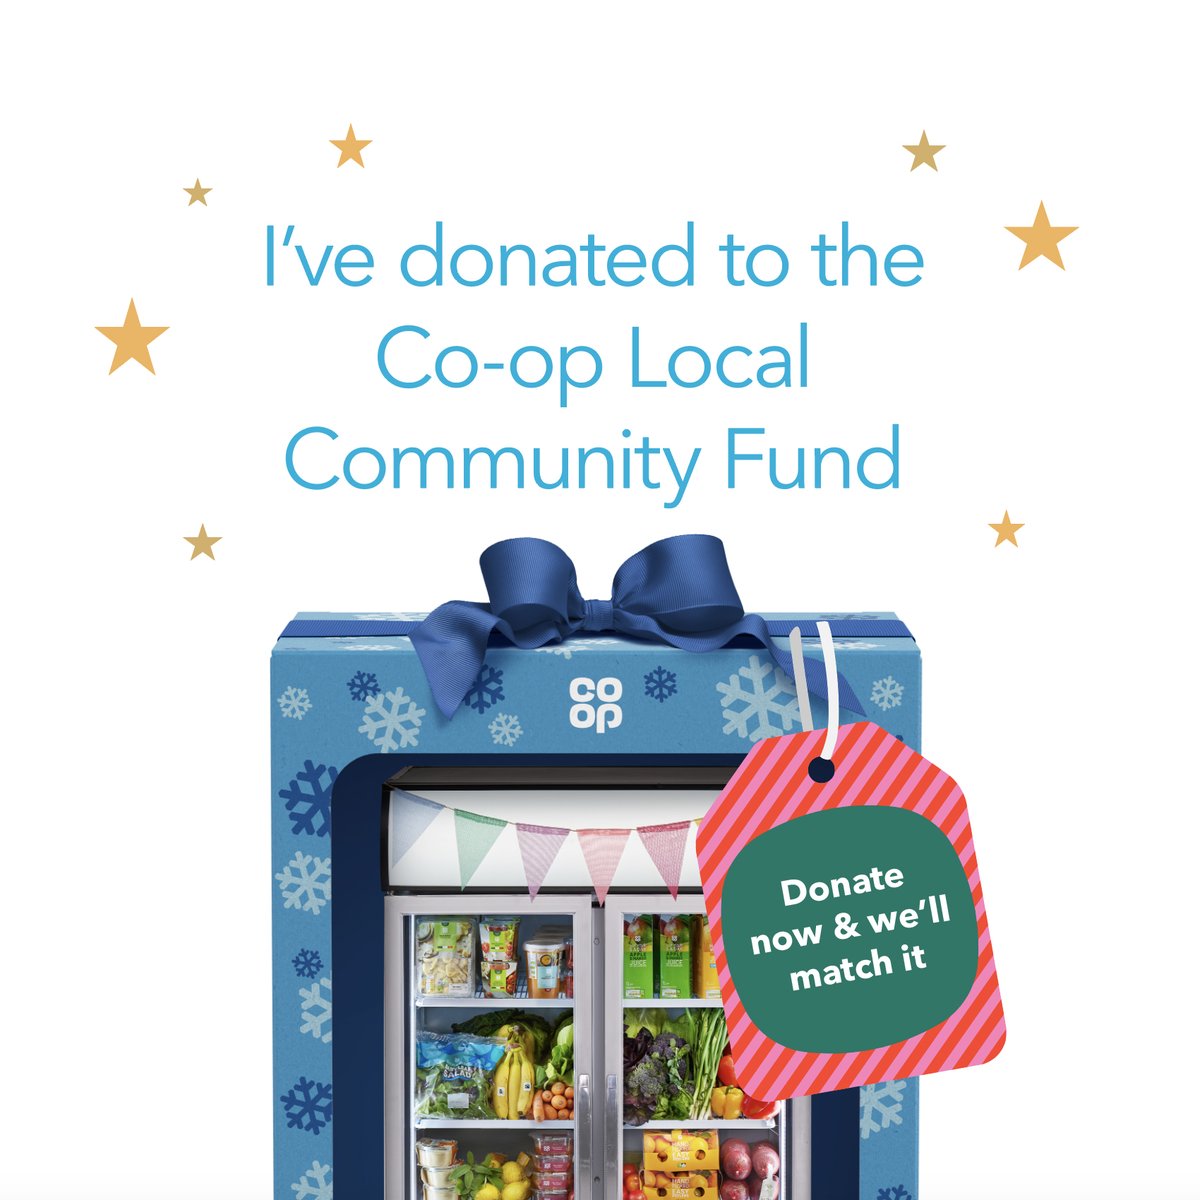 I've donated to the Co-op Local Community Fund and this Christmas, Co-op are matching donations to help causes across the UK 🎄💙 Find out how you can get involved too ➡️ coop.co.uk/givethegift